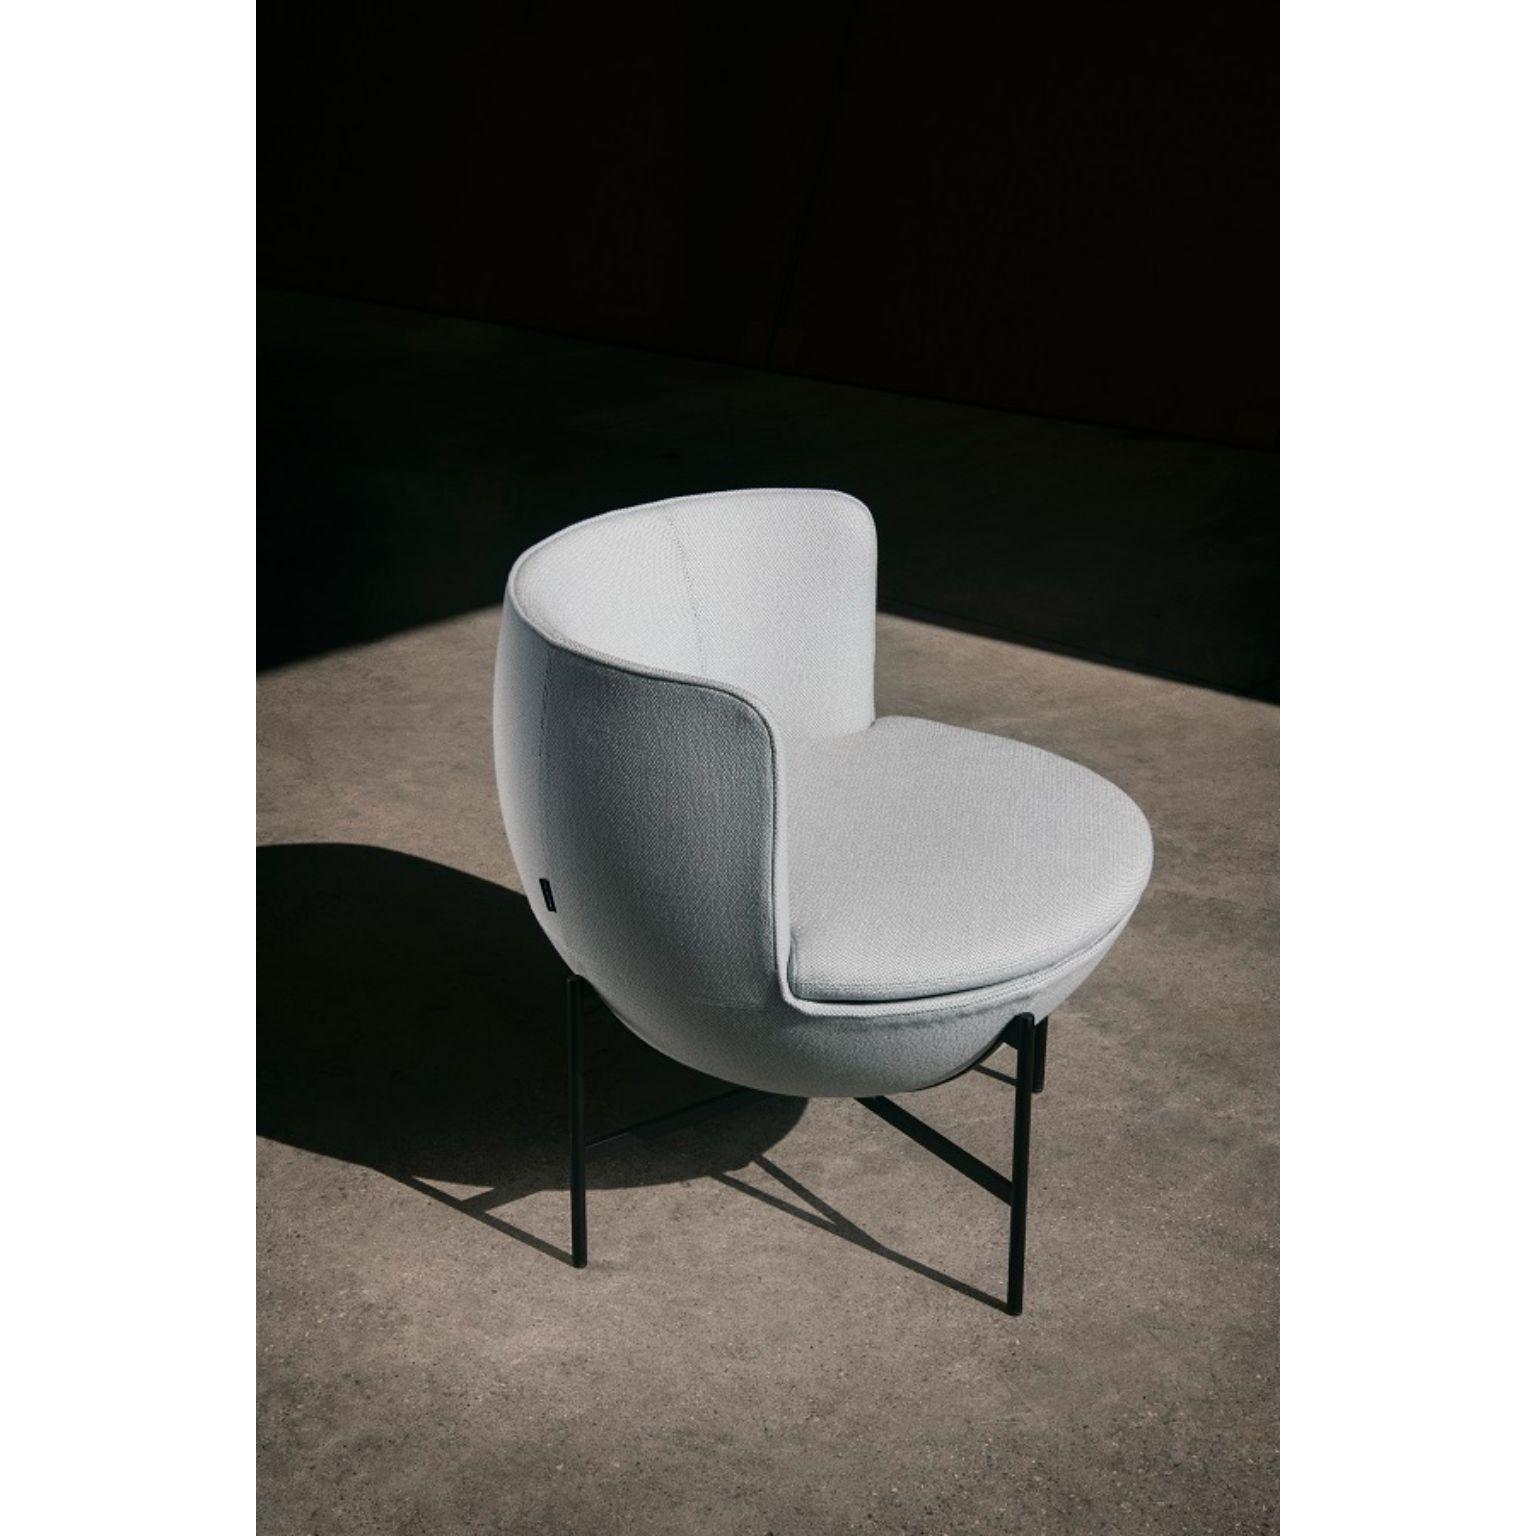 Calice armchair four-leg base by Patrick Norguet
Materials: Upholstery: Fabric or leather
Structure: Black powder-coated metal or matte champagne and black chrome
 
Dimensions: W 72.8 x D70.7 x H 71.6 cm
 HS 43.7 cm

The Calice armchair owes